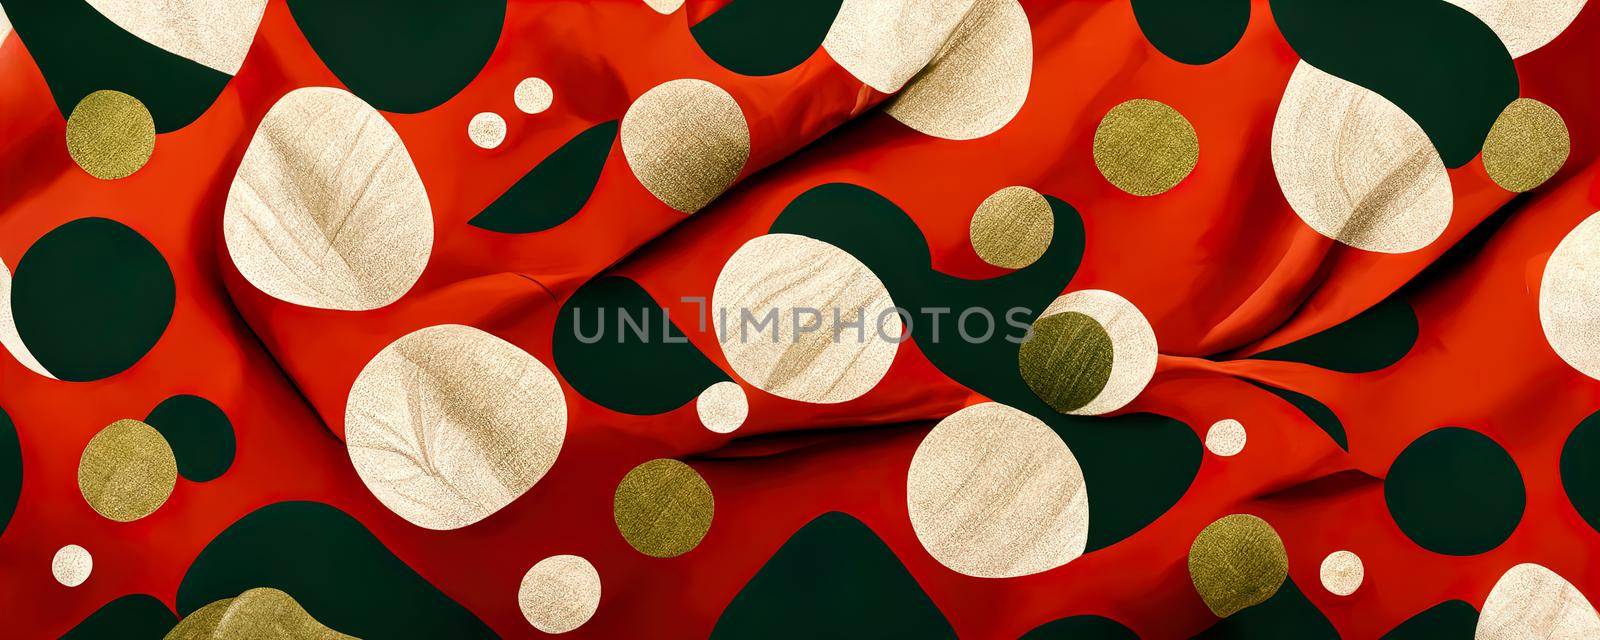 Christmas warm fabric with white and green circles on a red background, Colorful abstract wallpaper texture background illustration by TRMK